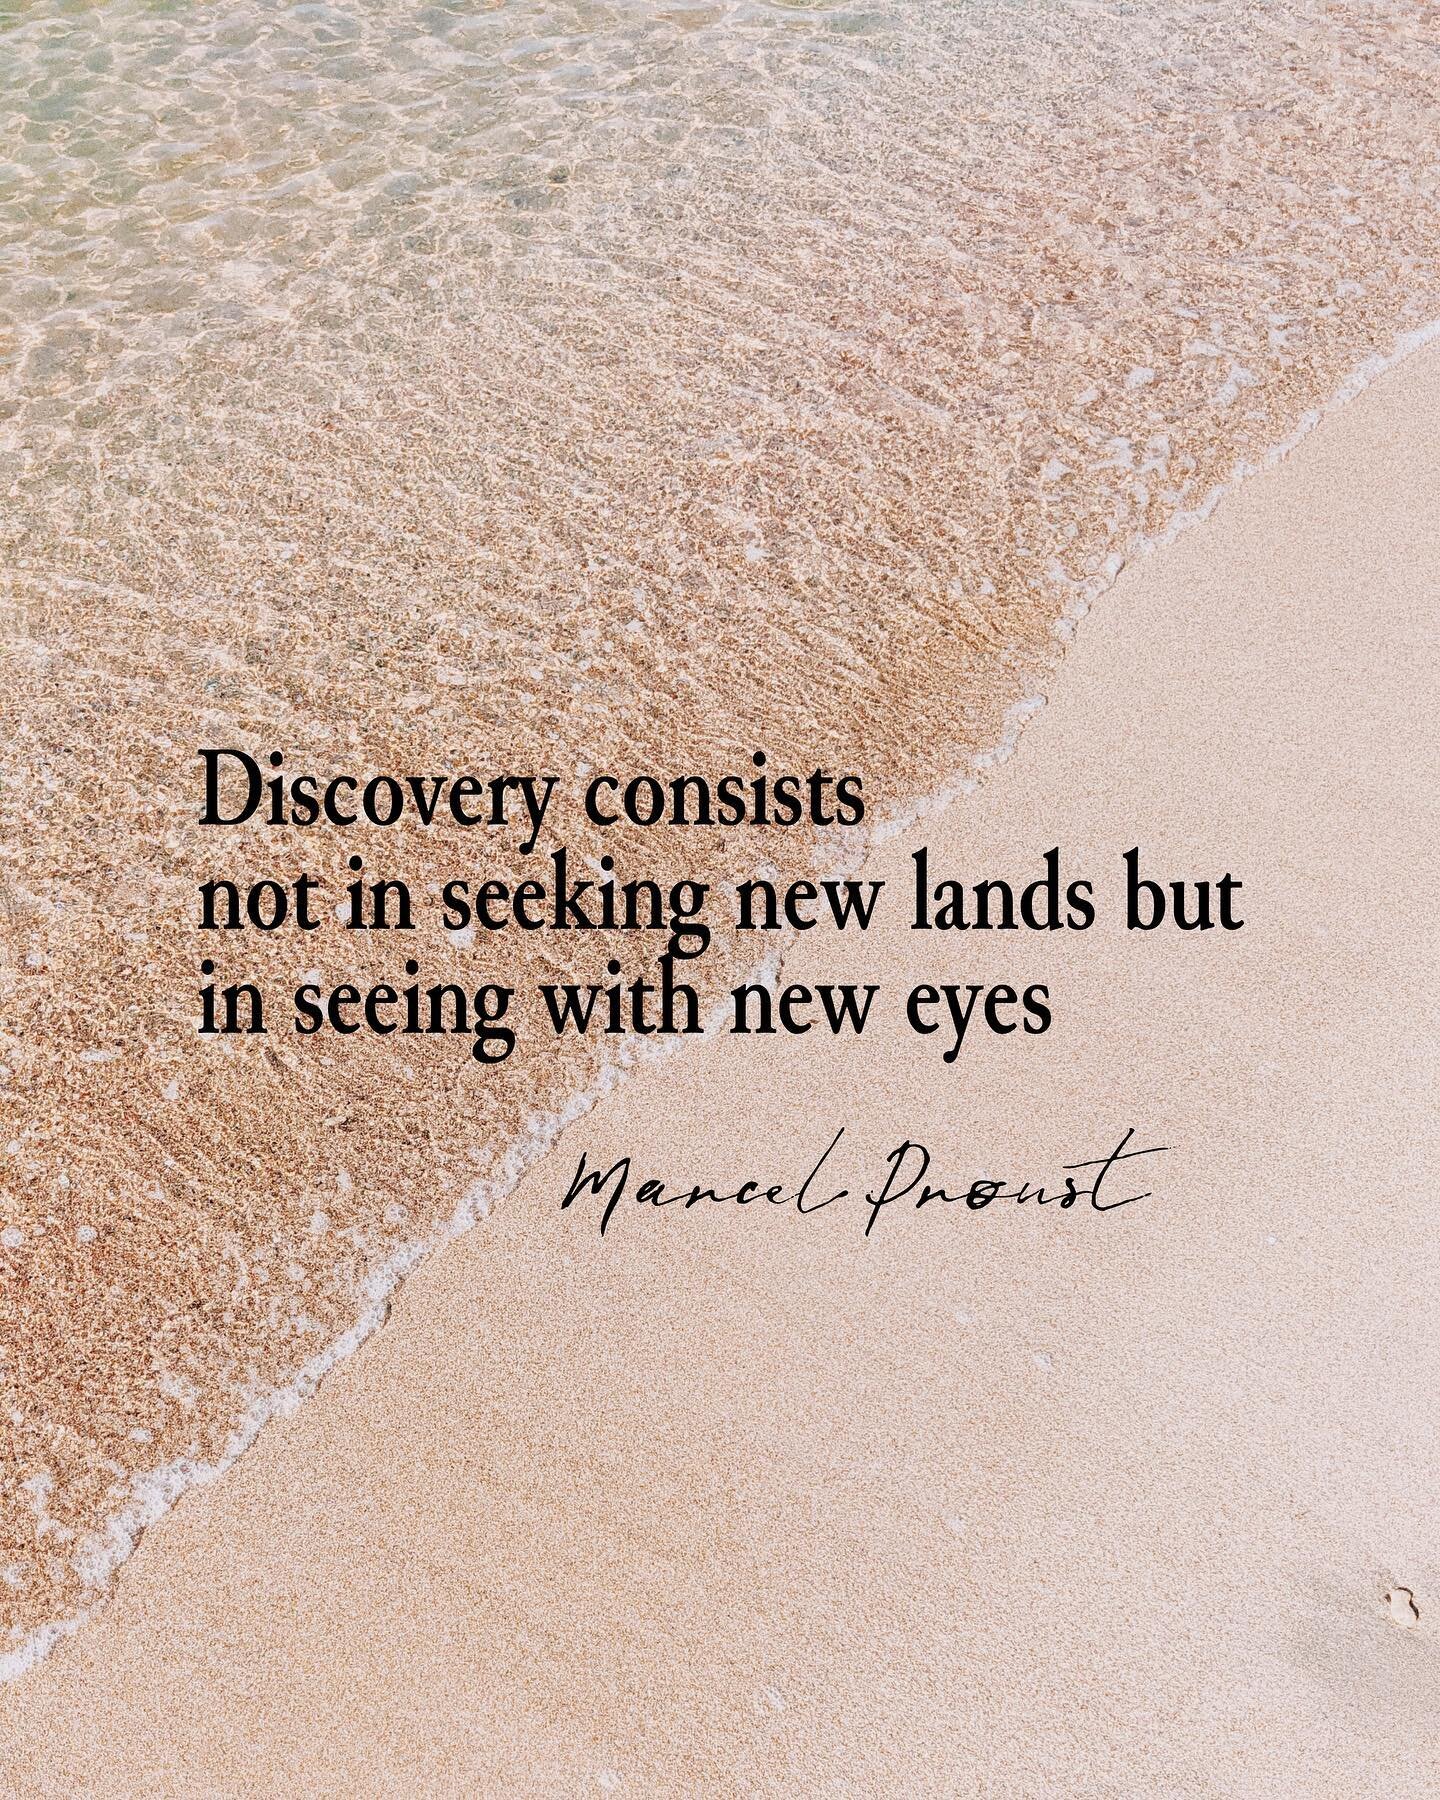 Discovery consists not in seeking new lands but in seeing with new eyes.&rdquo;-Marcel Proust
👀✨ Open your eyes to new creative perspectives with @wordswag

font combos: 
1️⃣ &ldquo;off white&rdquo; + &ldquo;to be honest&rdquo;
2️⃣ &rdquo;stockholm&